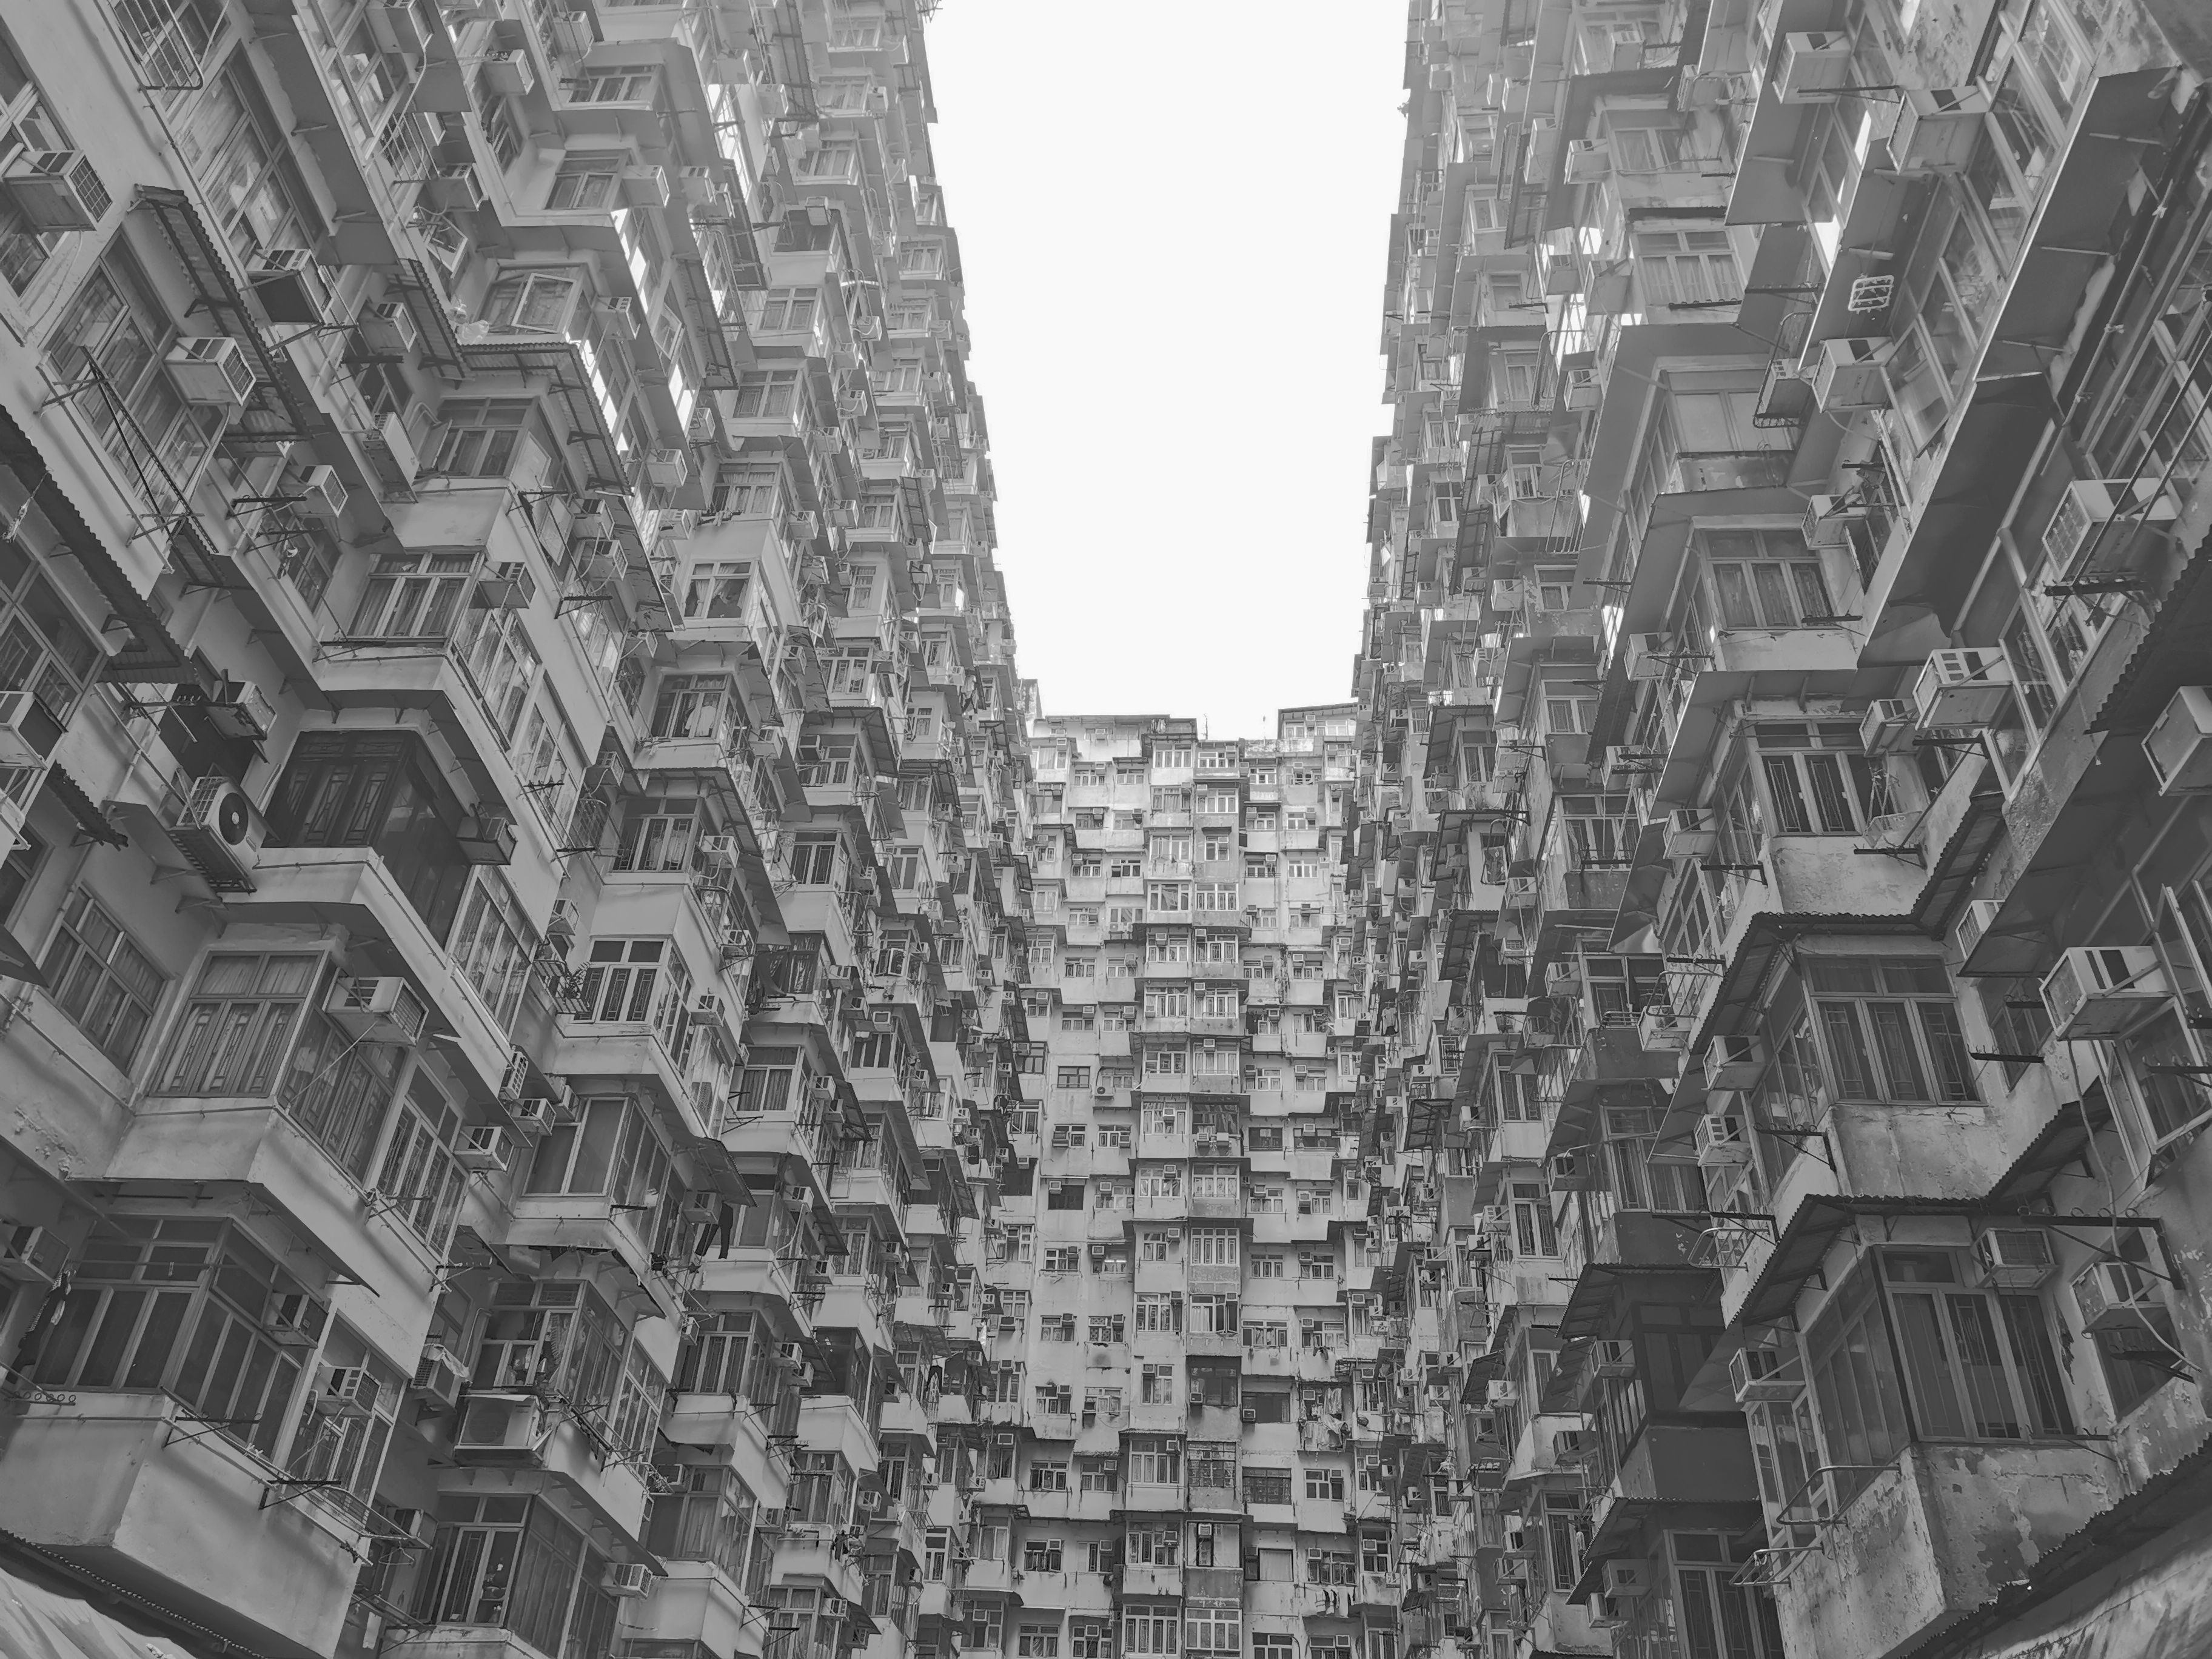 View Of The Monster Building in Hong Kong